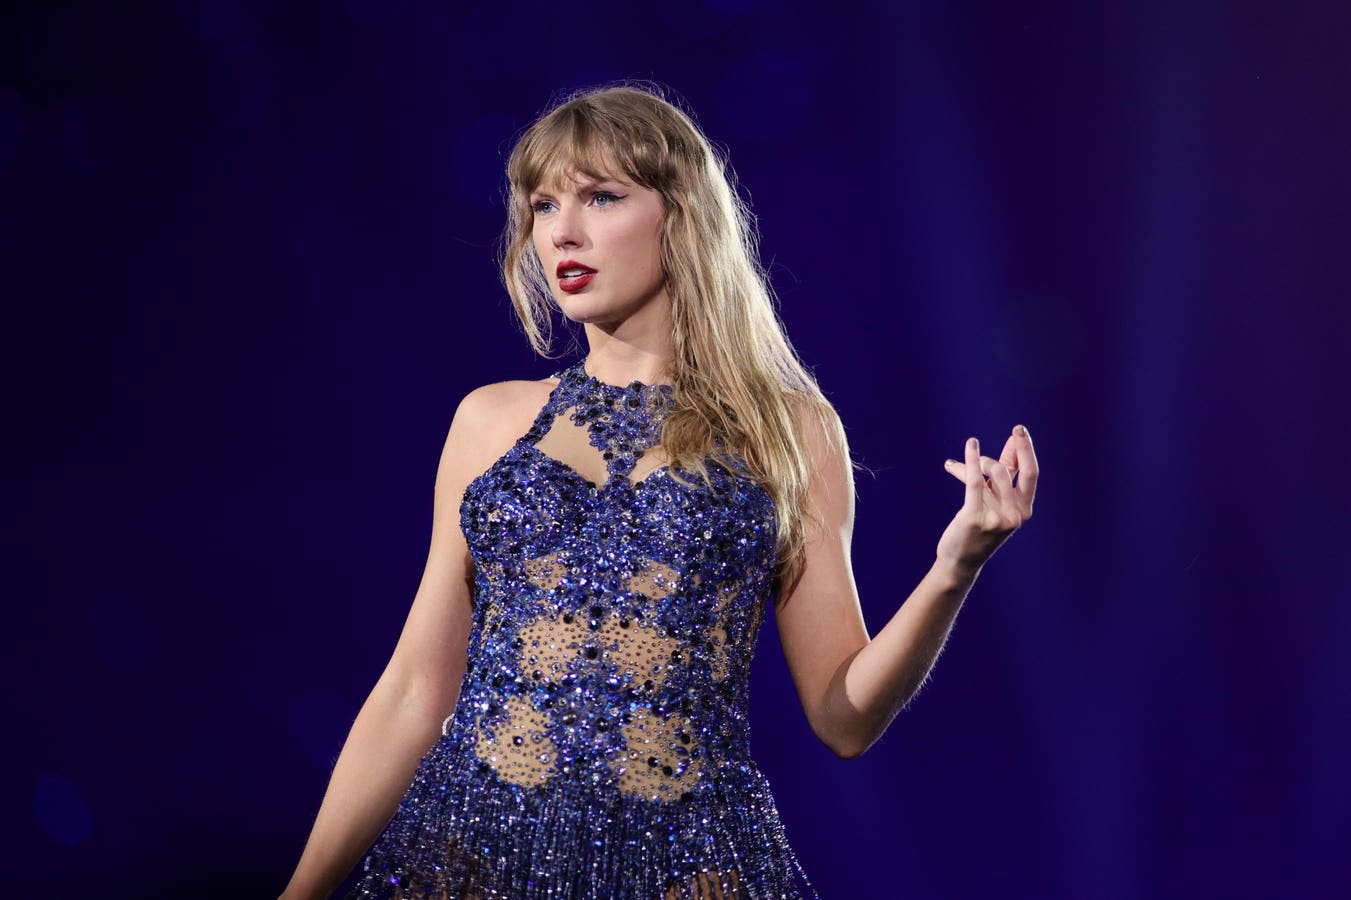 Taylor Swift’s New Album Falls From No. 1 For The First Time Since It Debuted